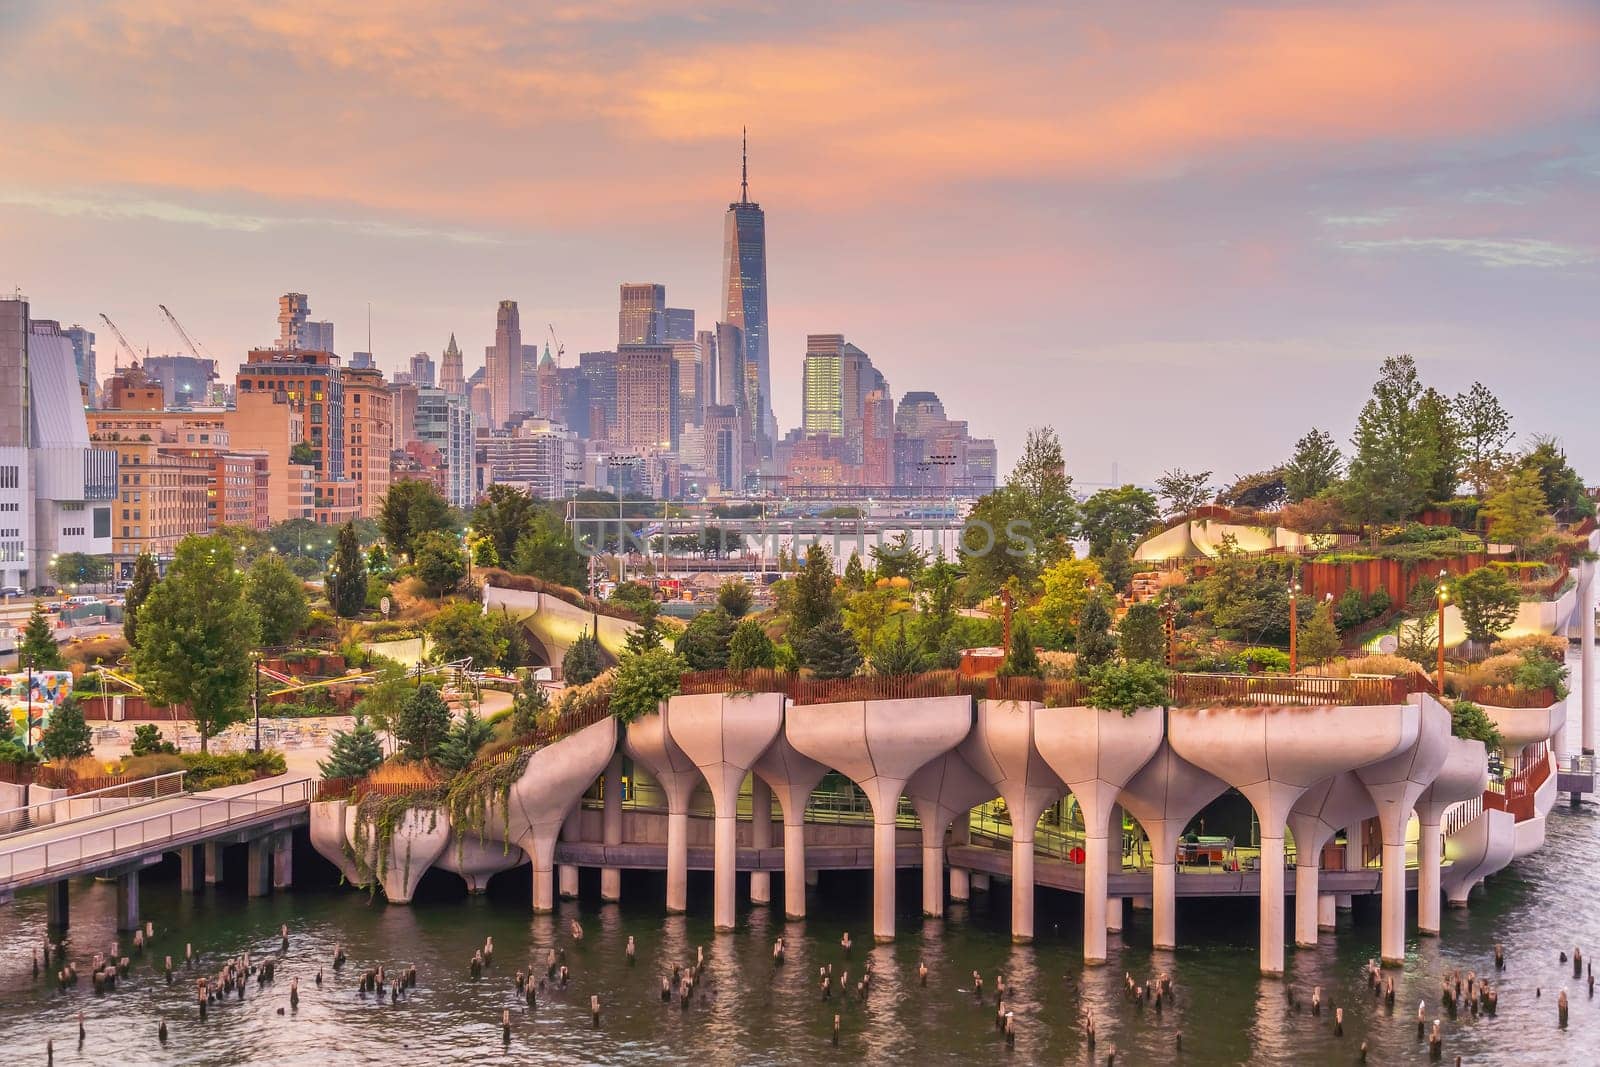 Cityscape of downtown Manhattan skyline with the Little Island Public Park in New York City at sunrise